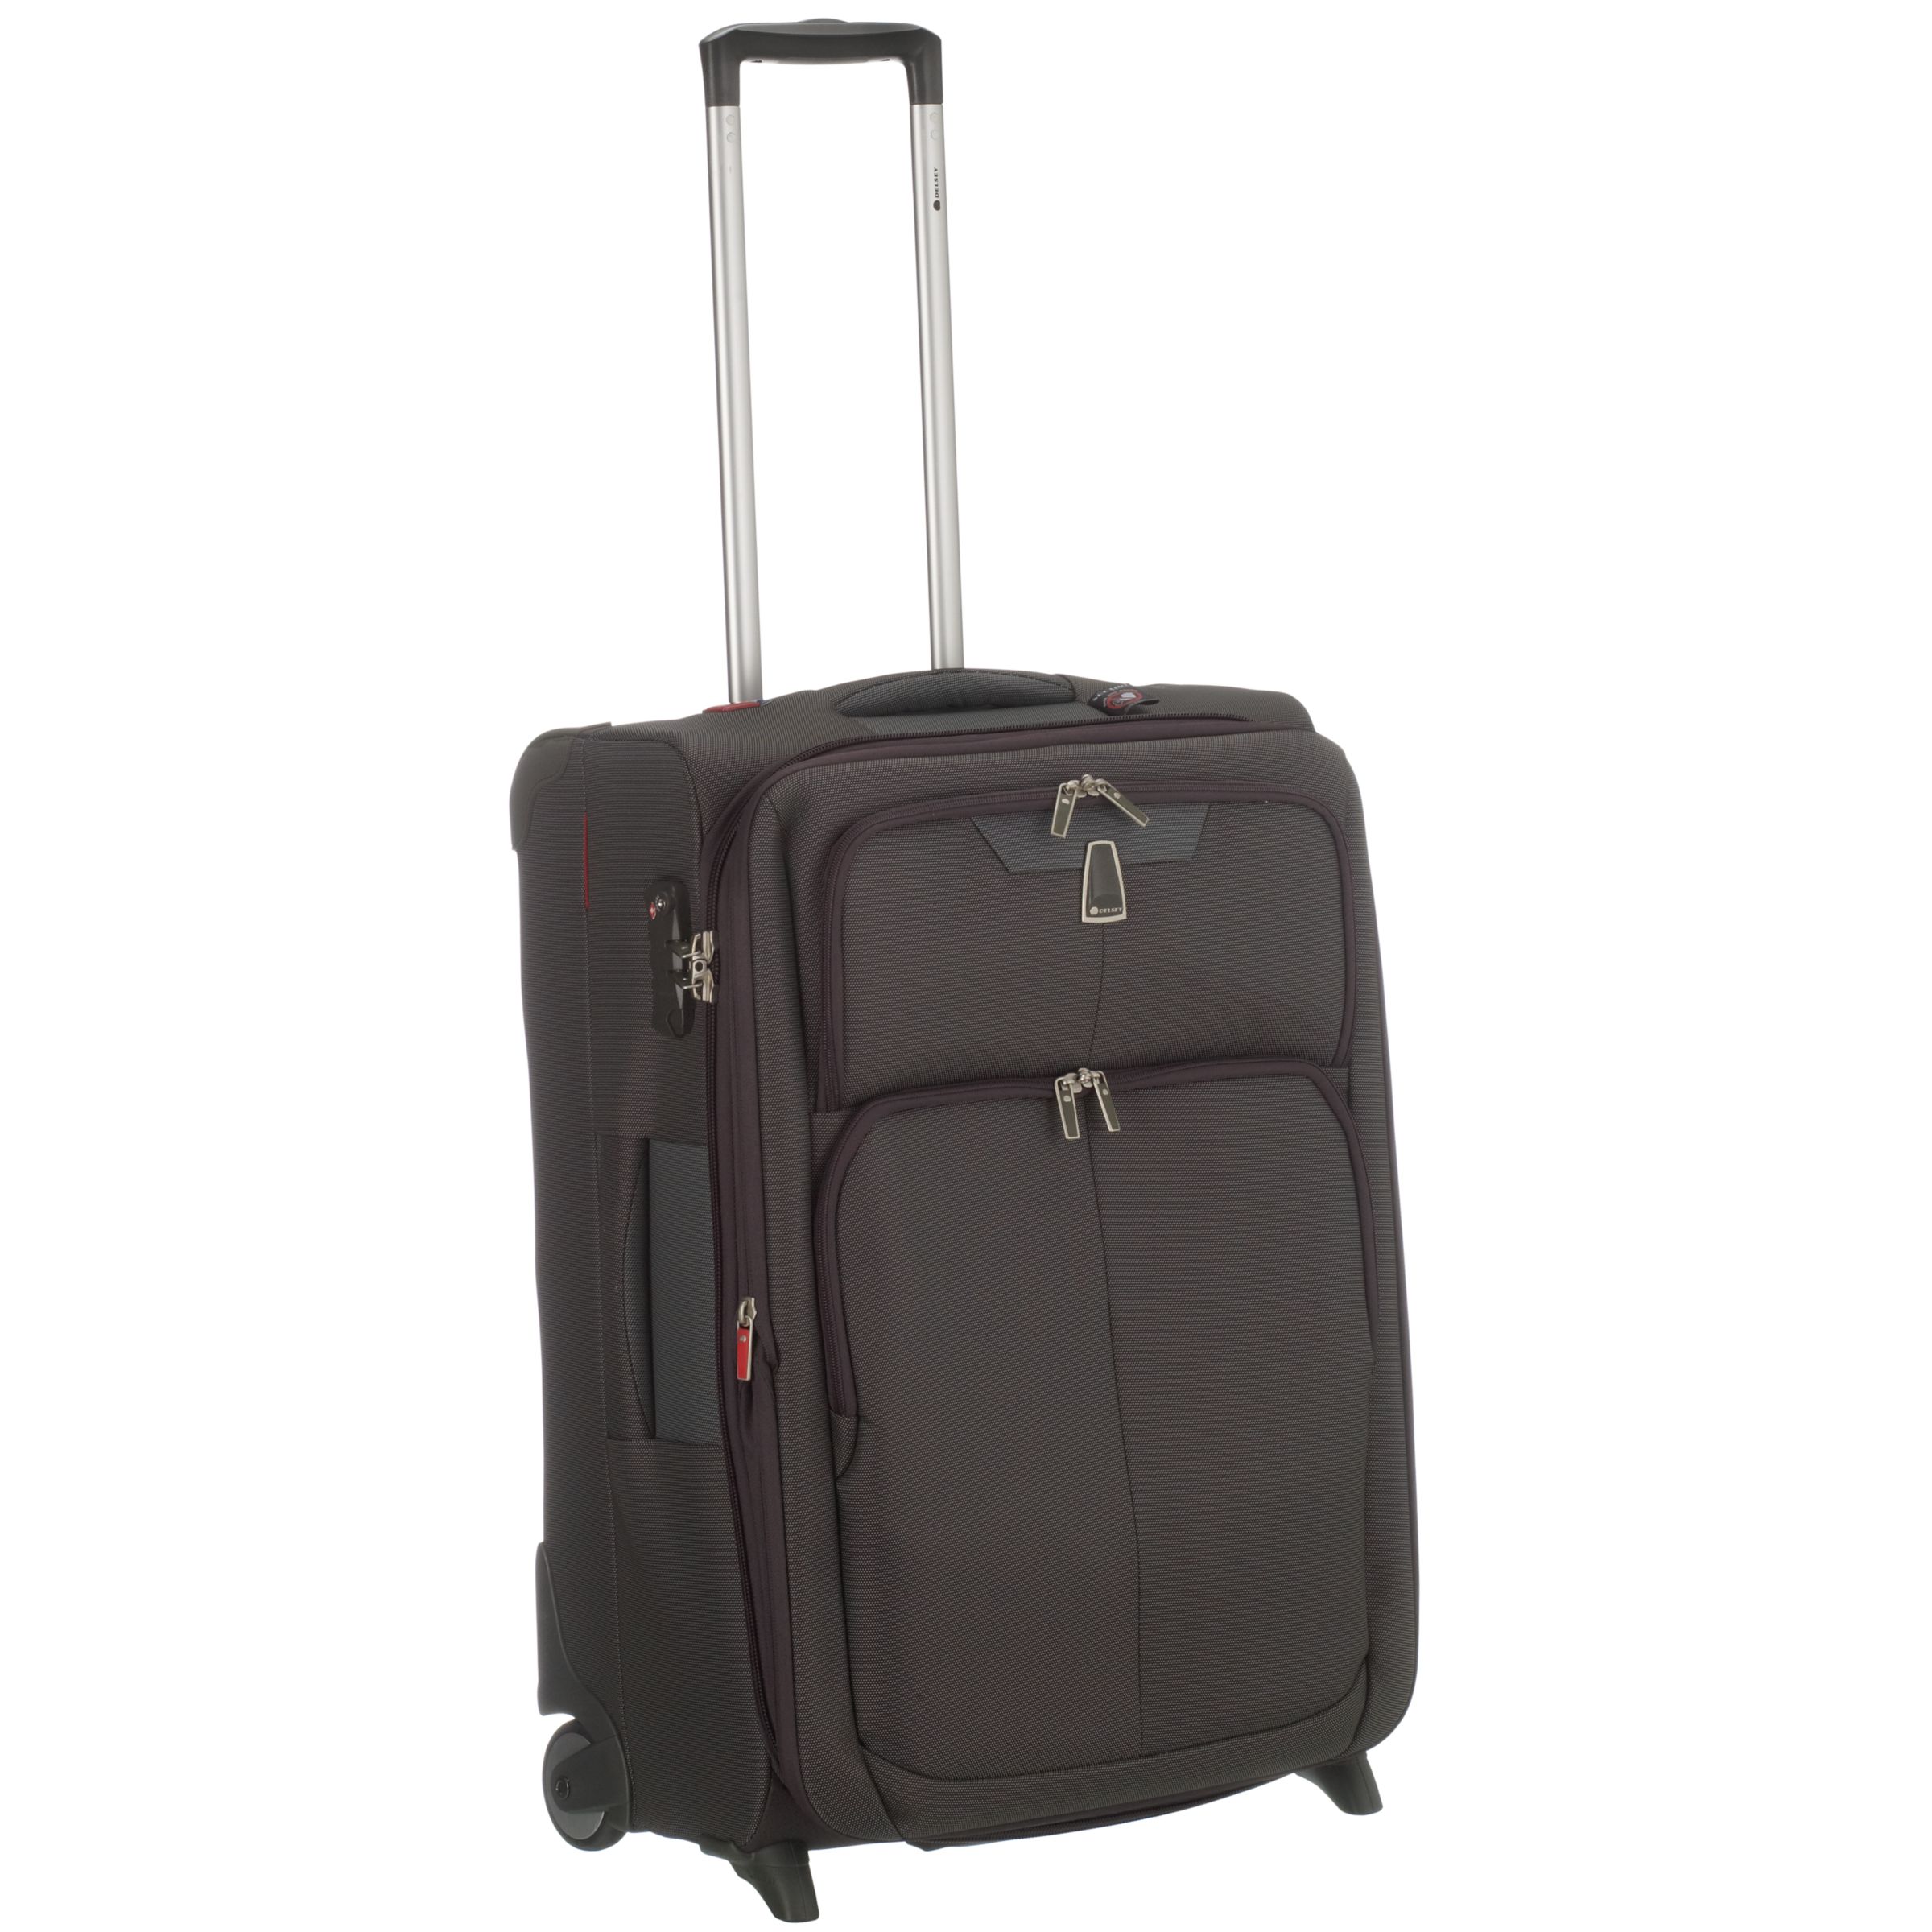 Delsey X'Pert Lite Expandable Trolley Cases, Grey at John Lewis